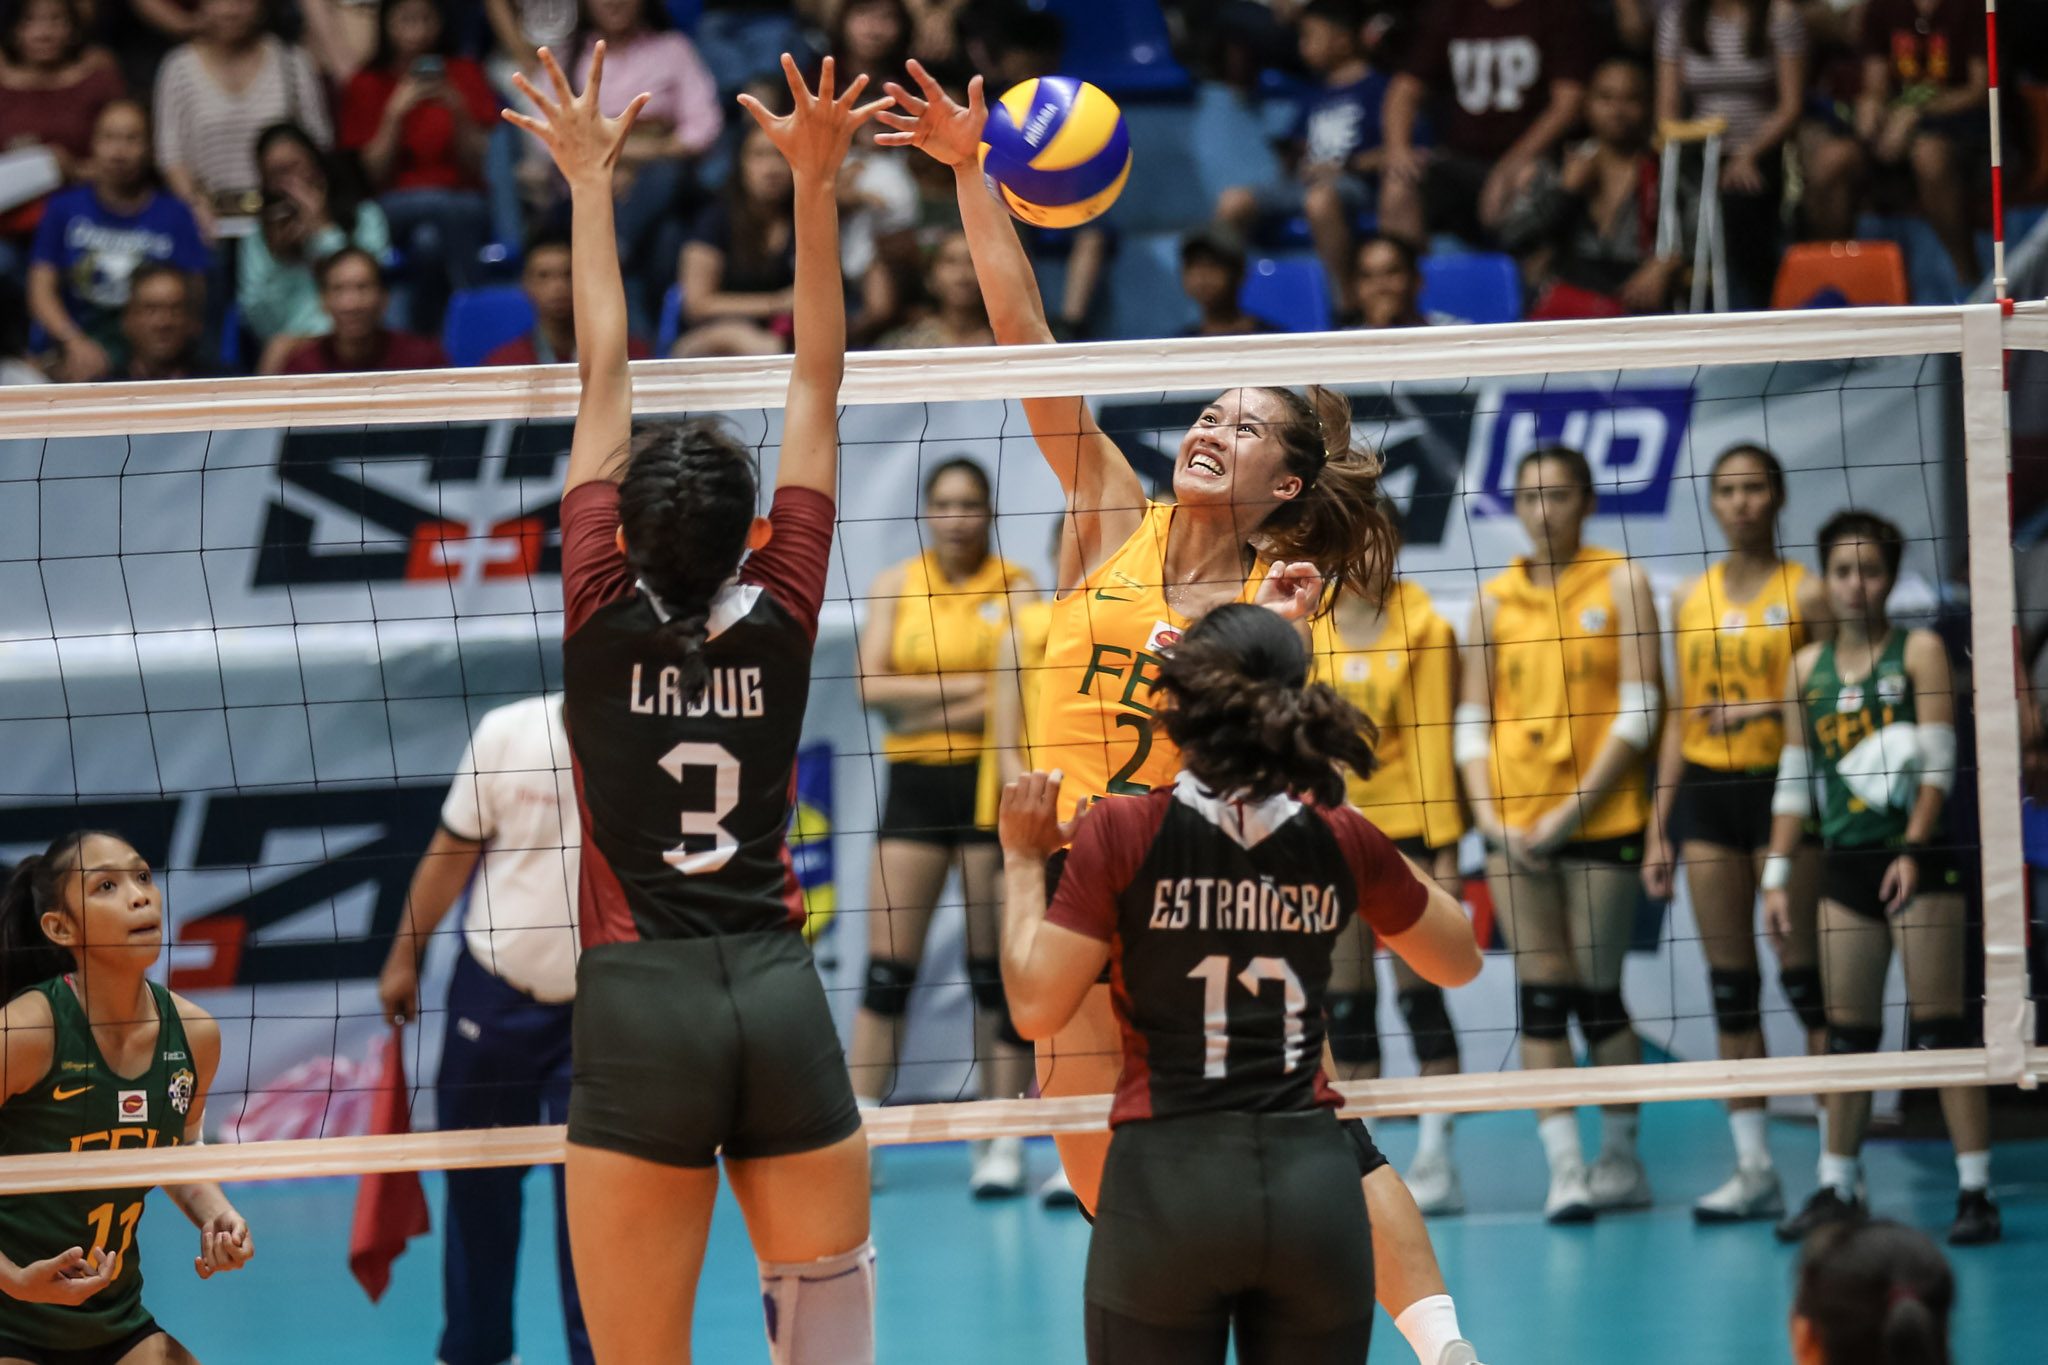 Pons takes back seat as FEU bounces back to winning momentum